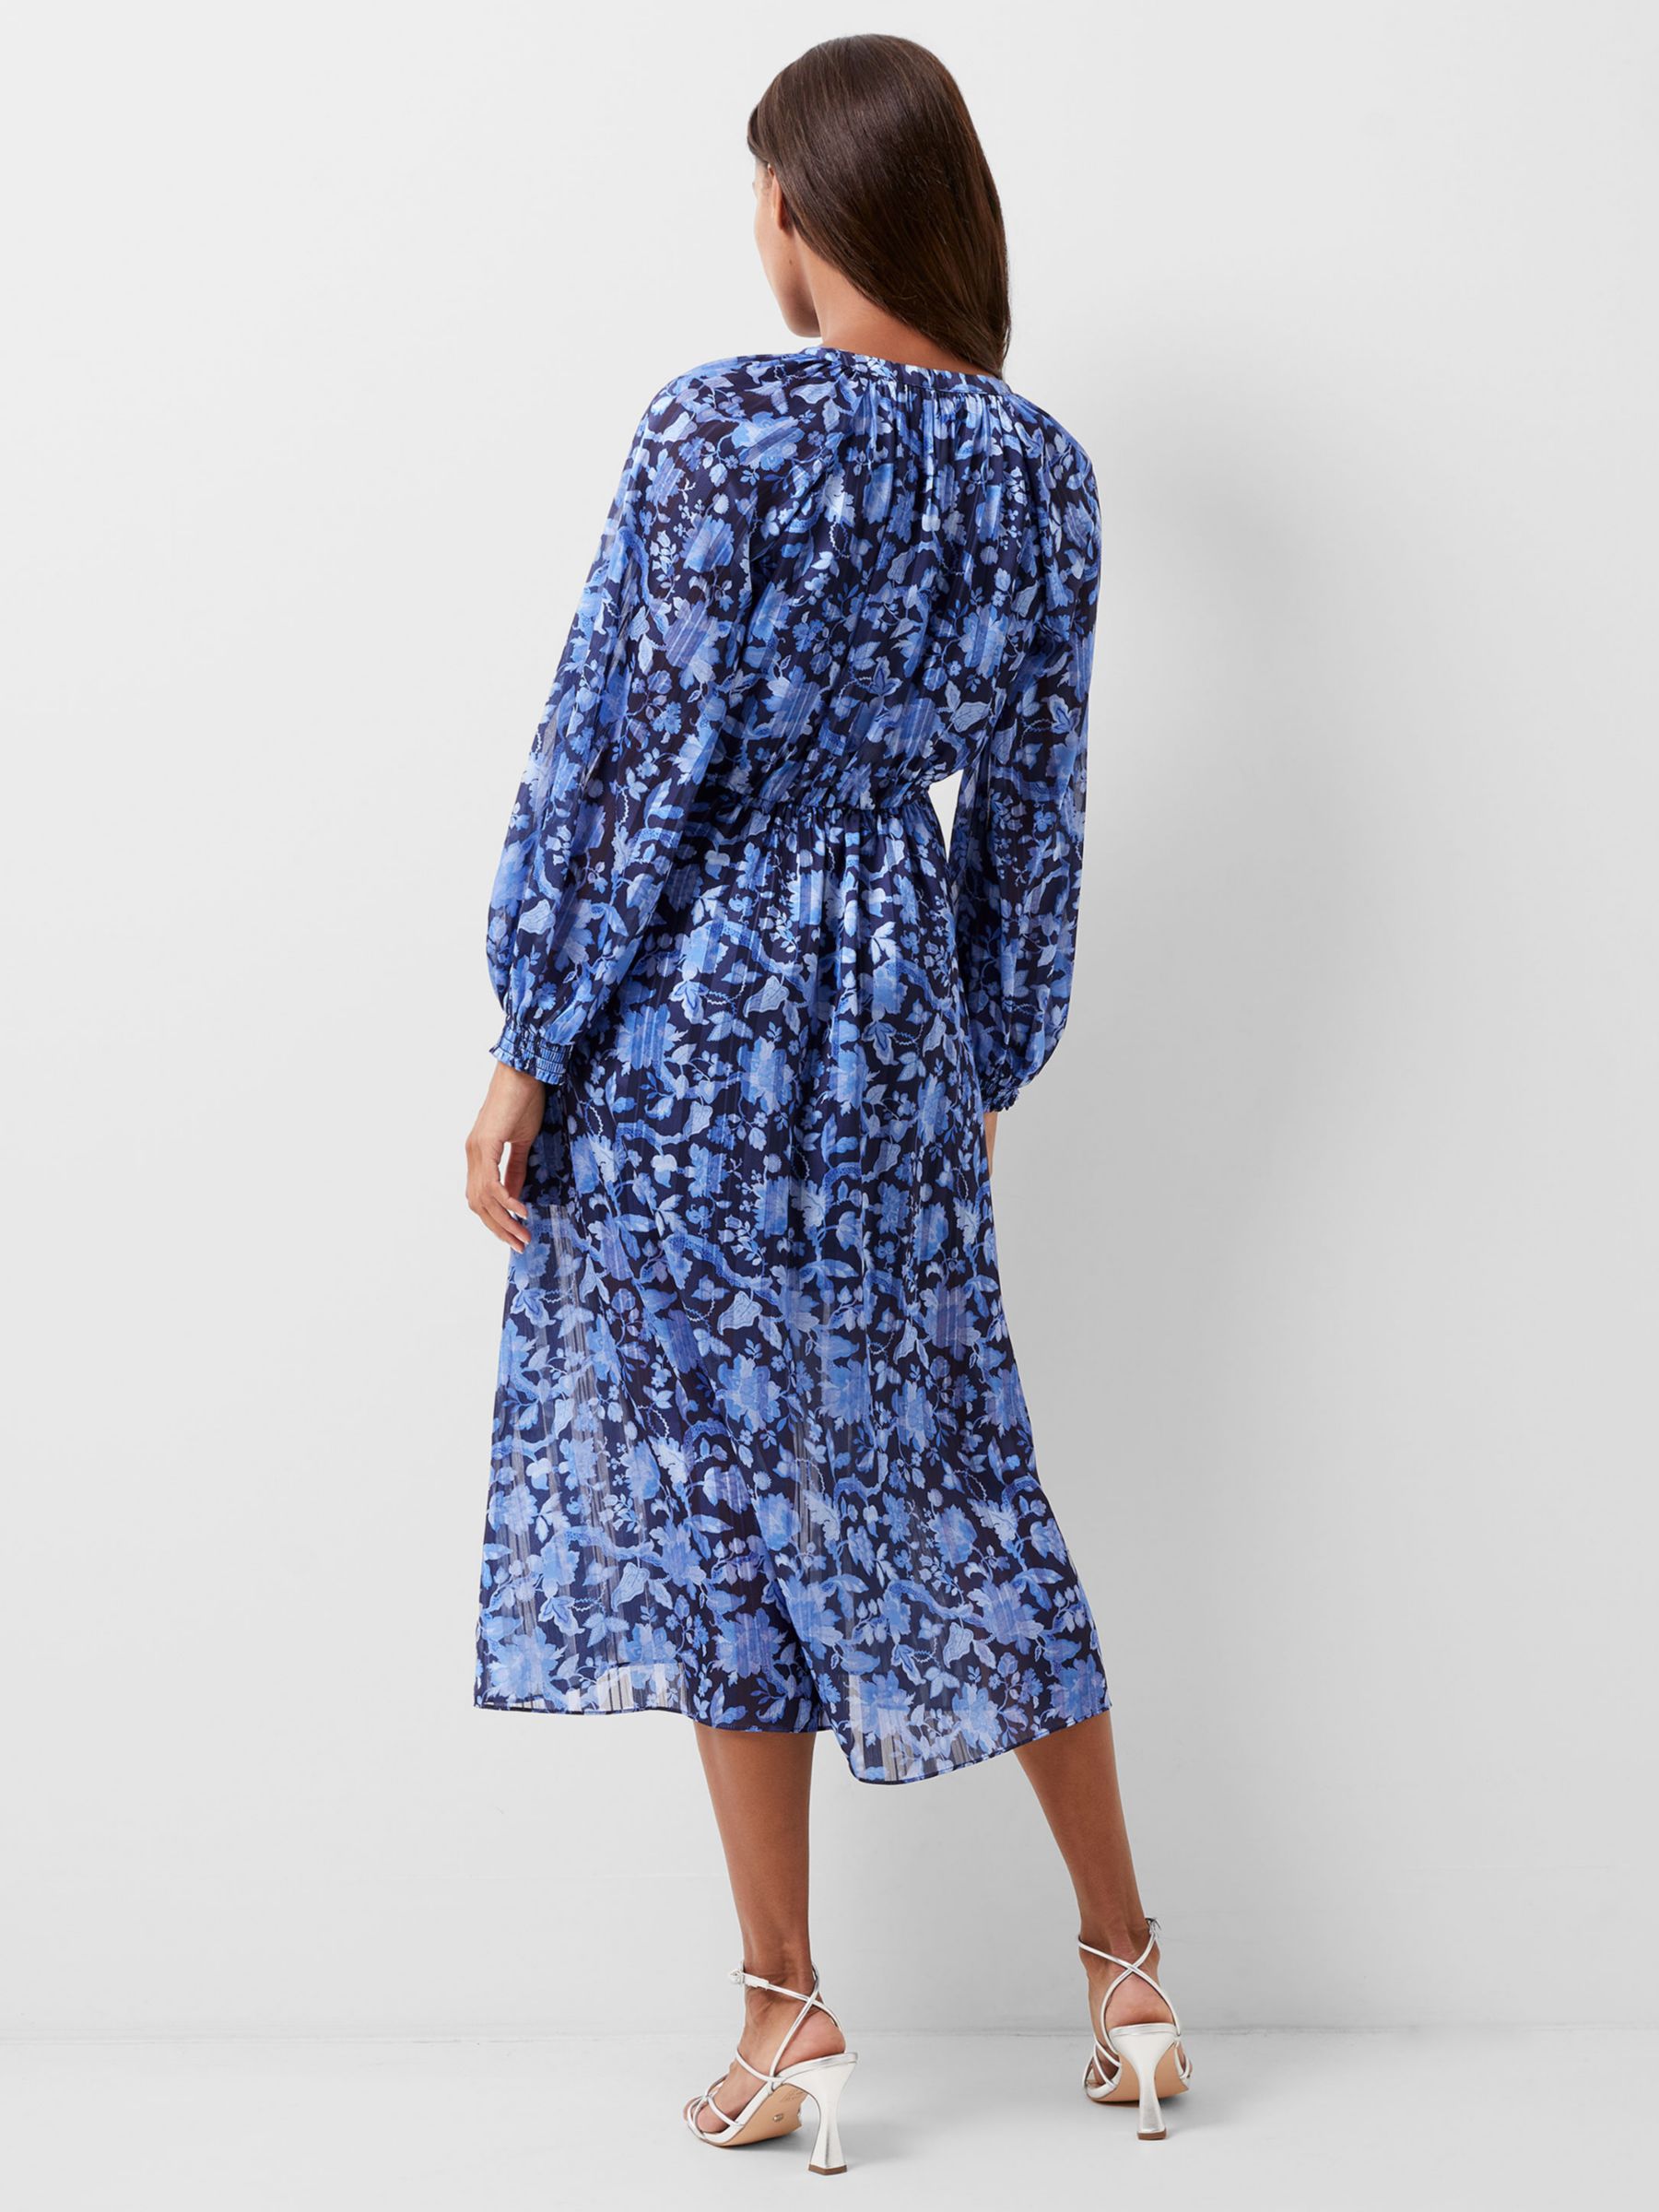 French Connection Cynthia Fauna Dress, Midnight Blue, 18